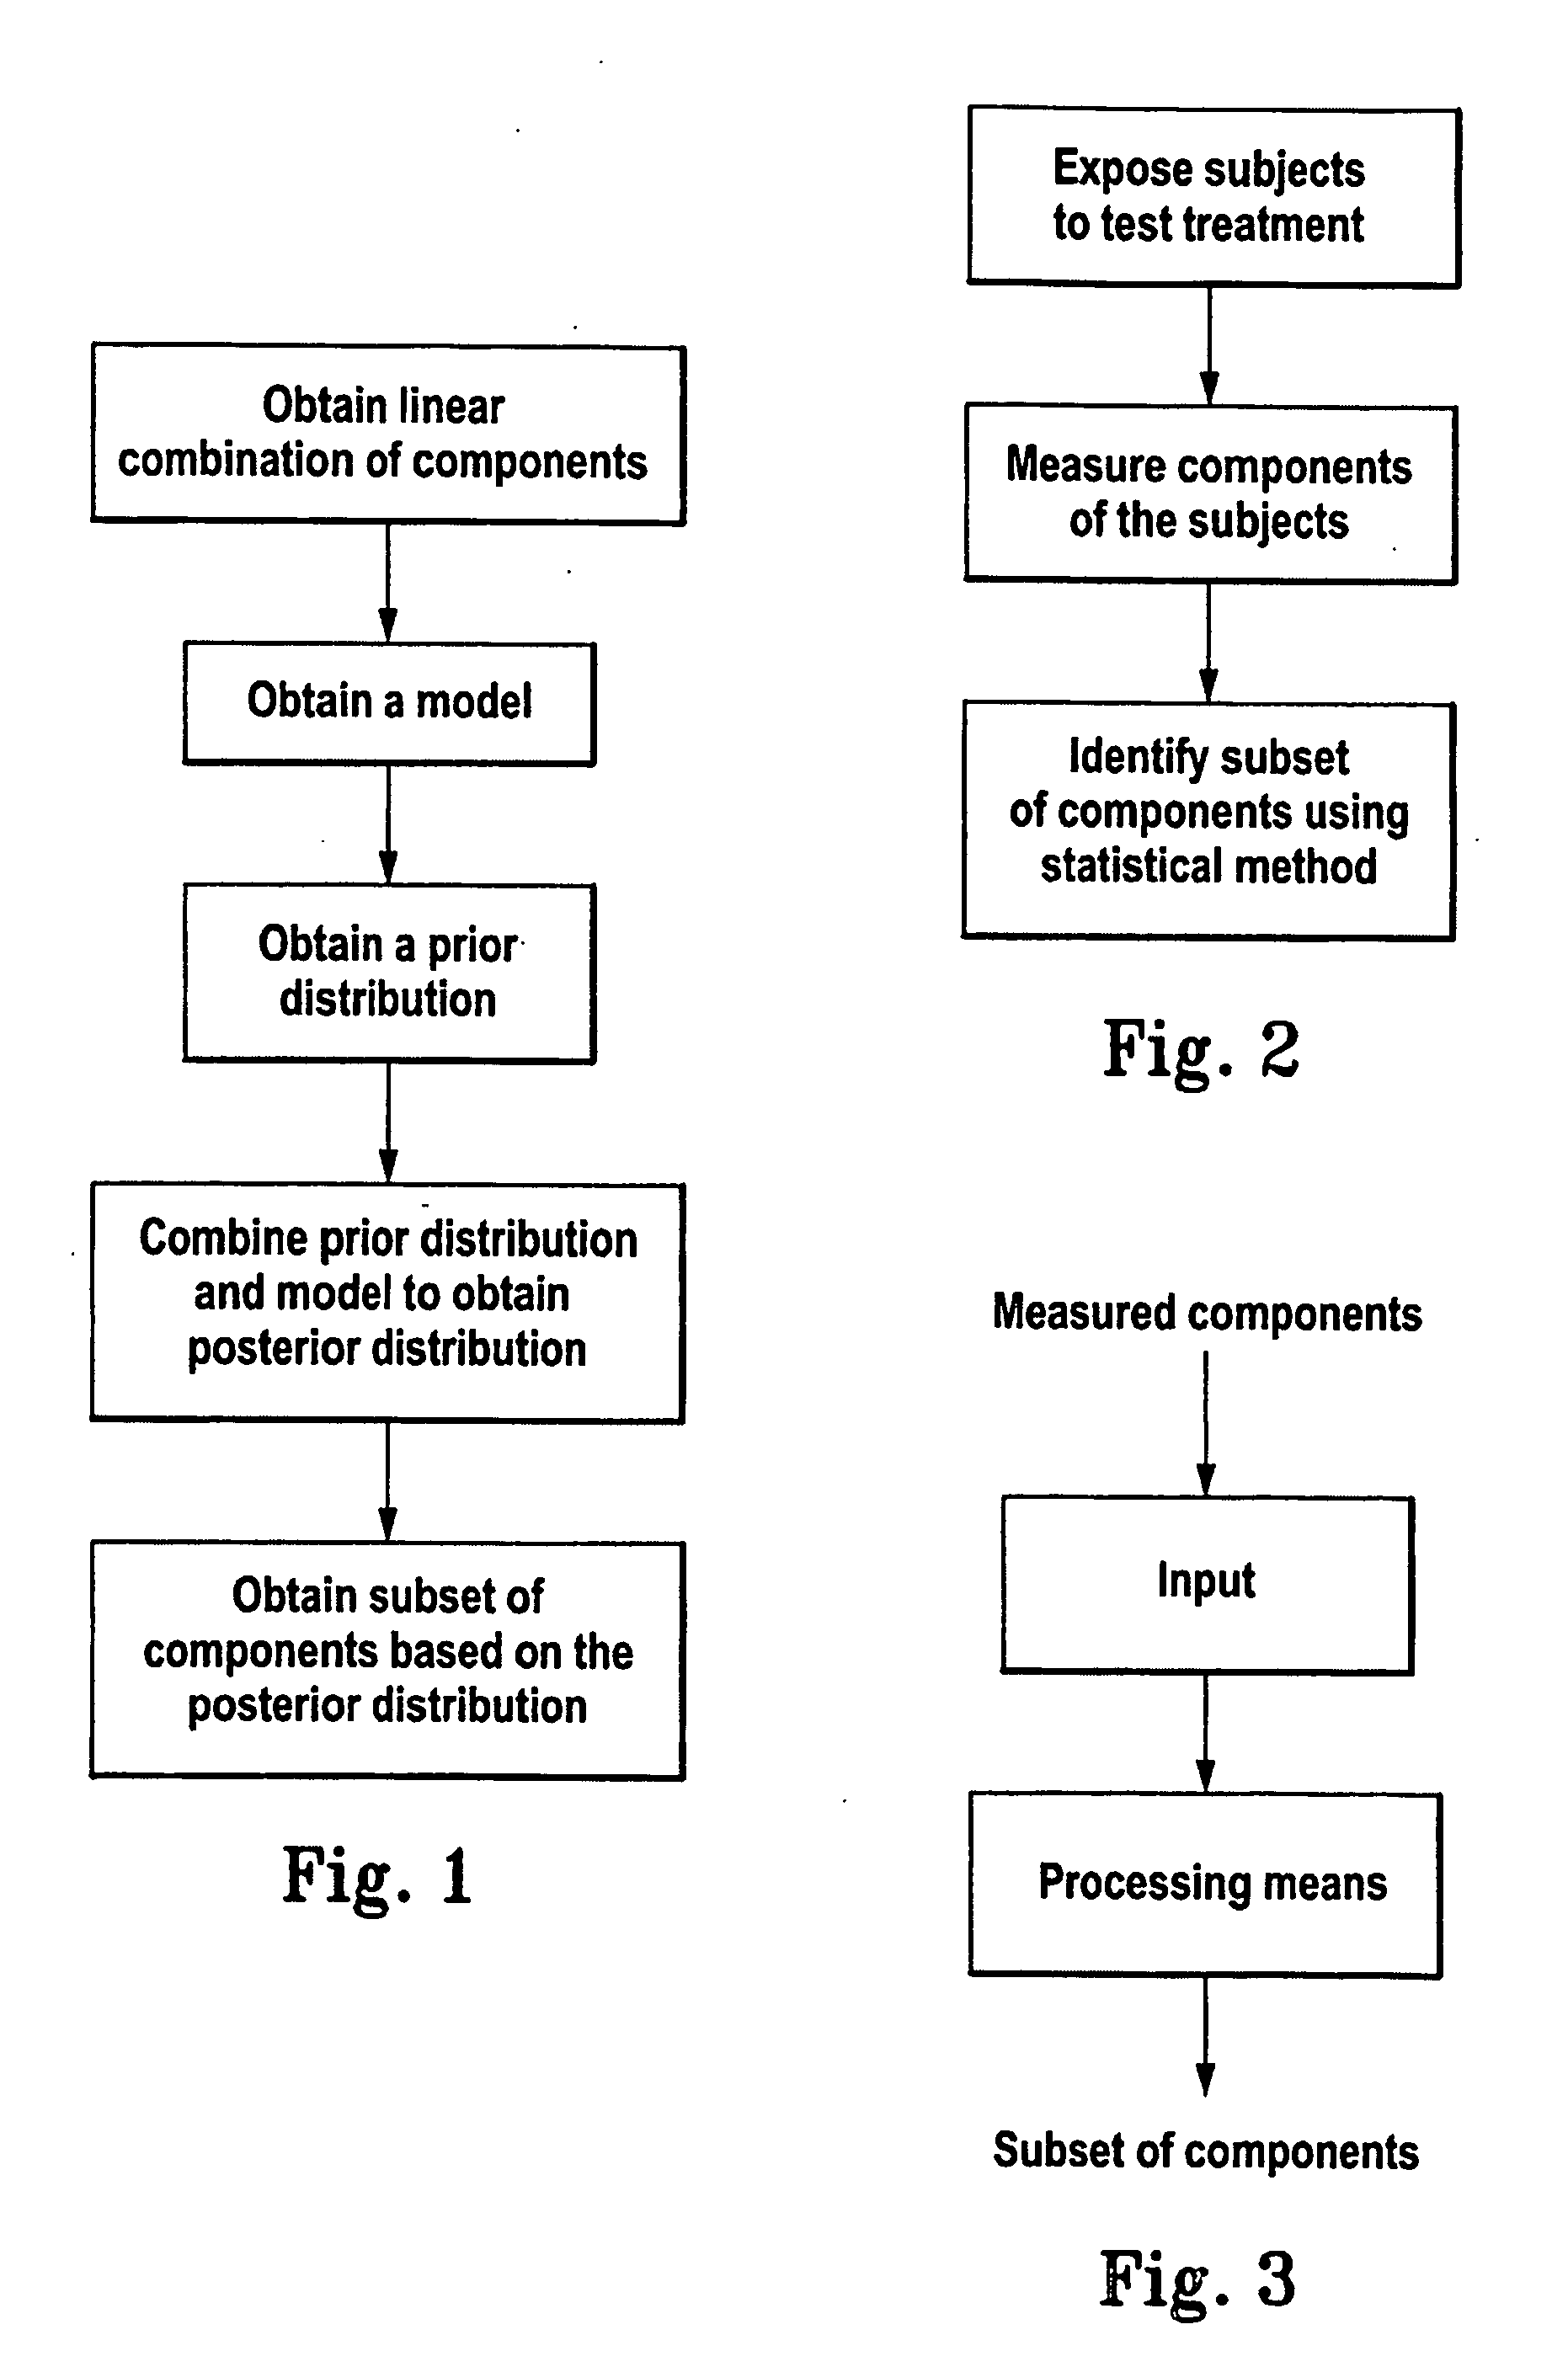 Method for identifying a subset of components of a system